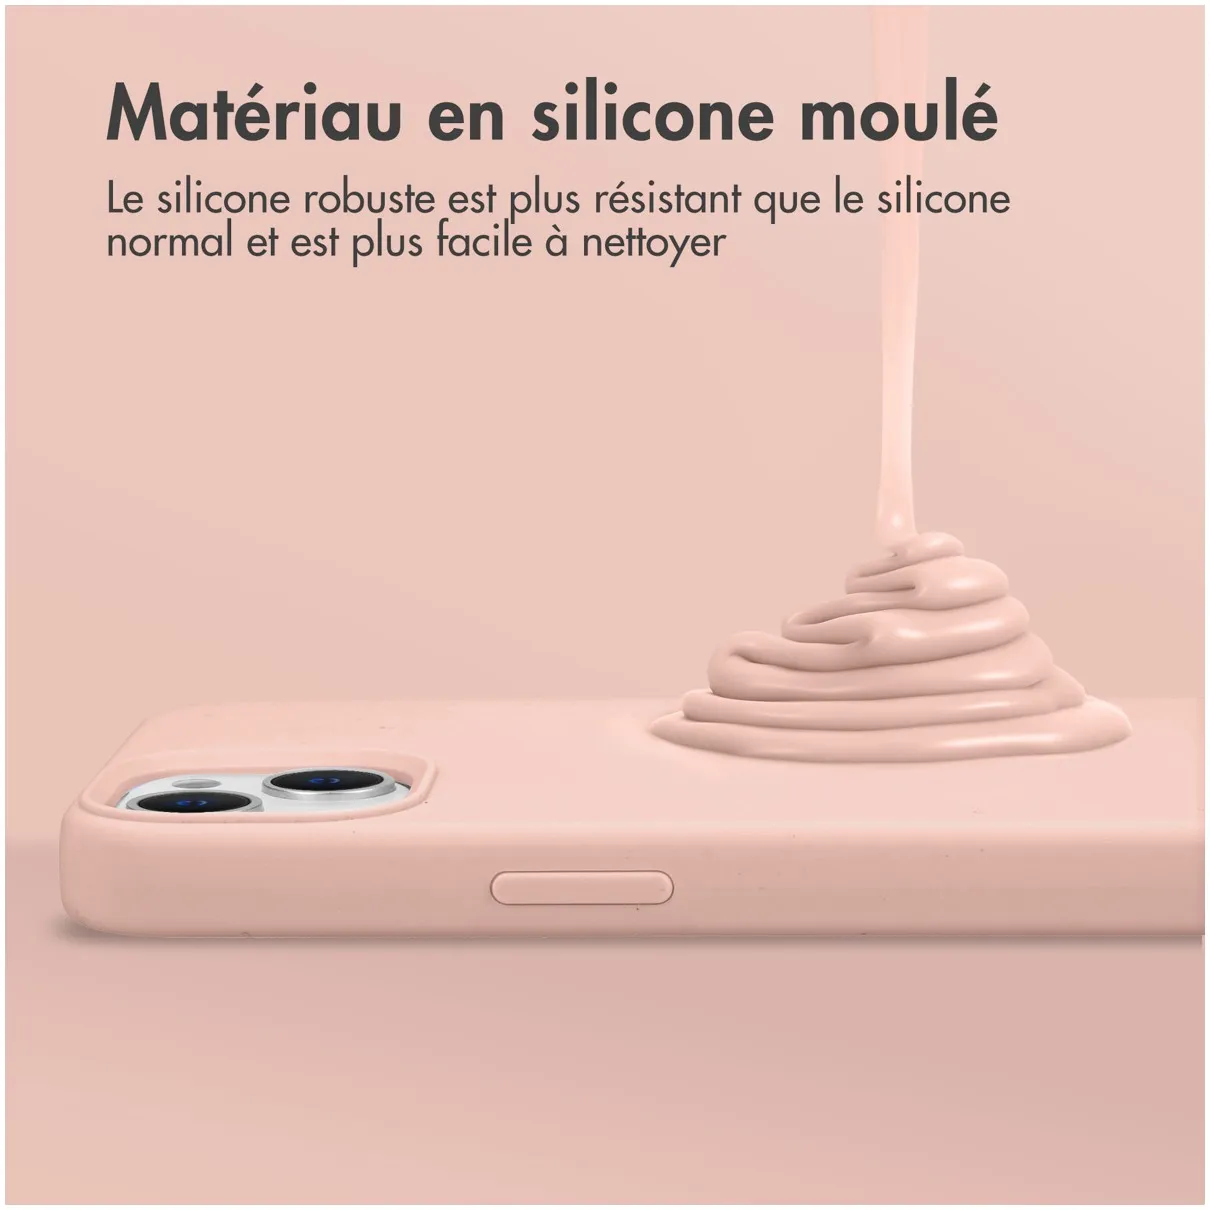 Accezz Liquid Silicone Backcover Google Pixel 8 Roze